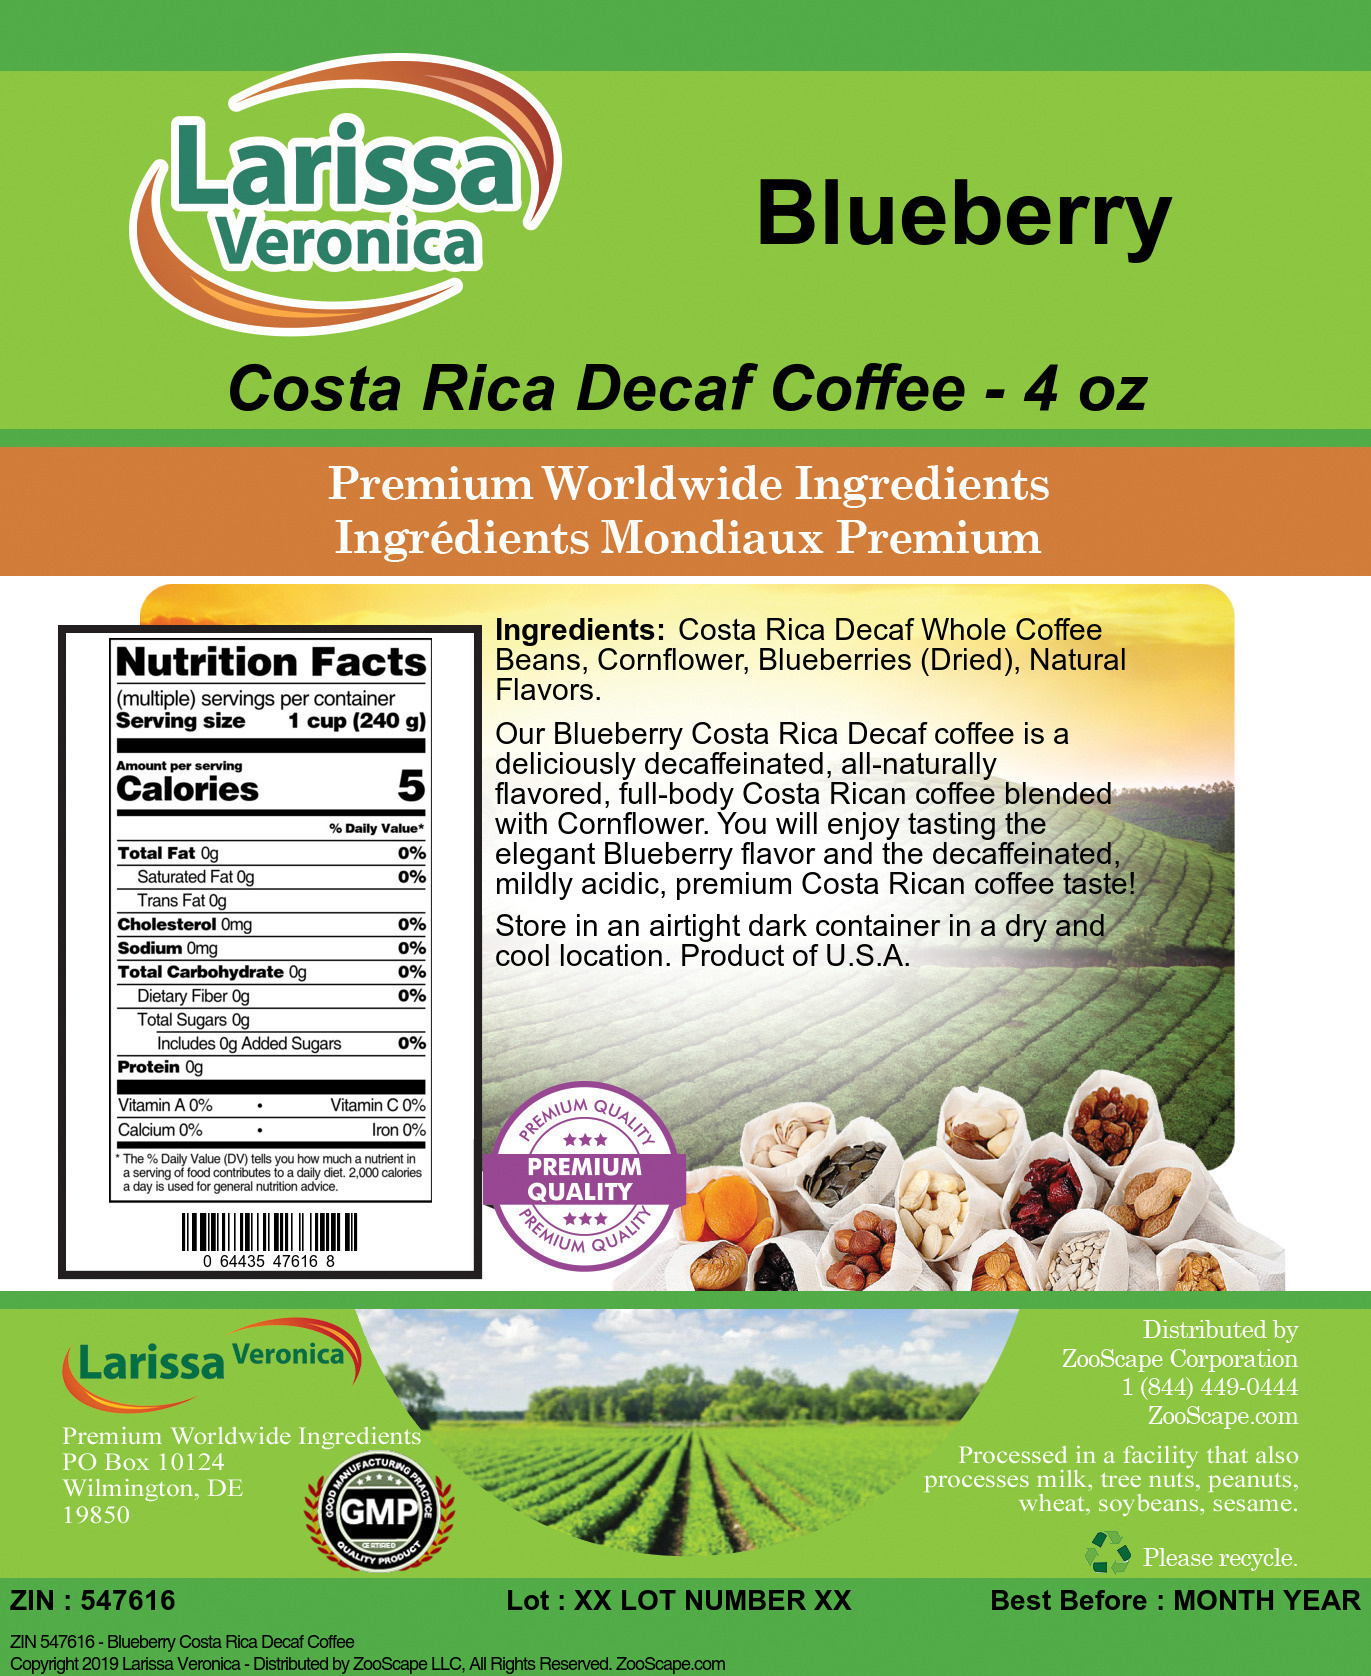 Blueberry Costa Rica Decaf Coffee - Label